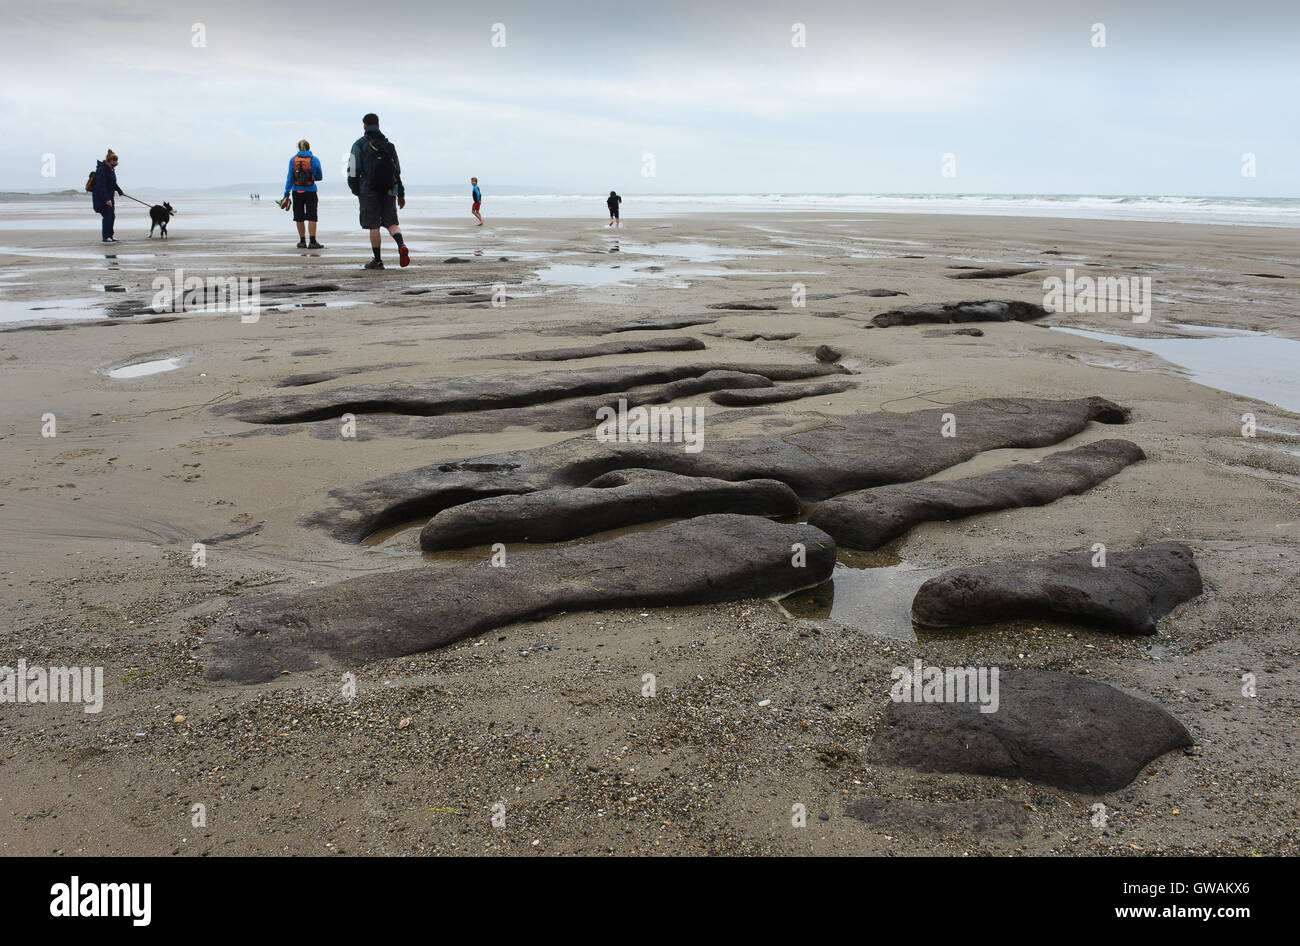 Remains of ancient 5,000-year-old trees revealed on beach Tywyn in Mid Wales after peat was washed away during storms. Stock Photo